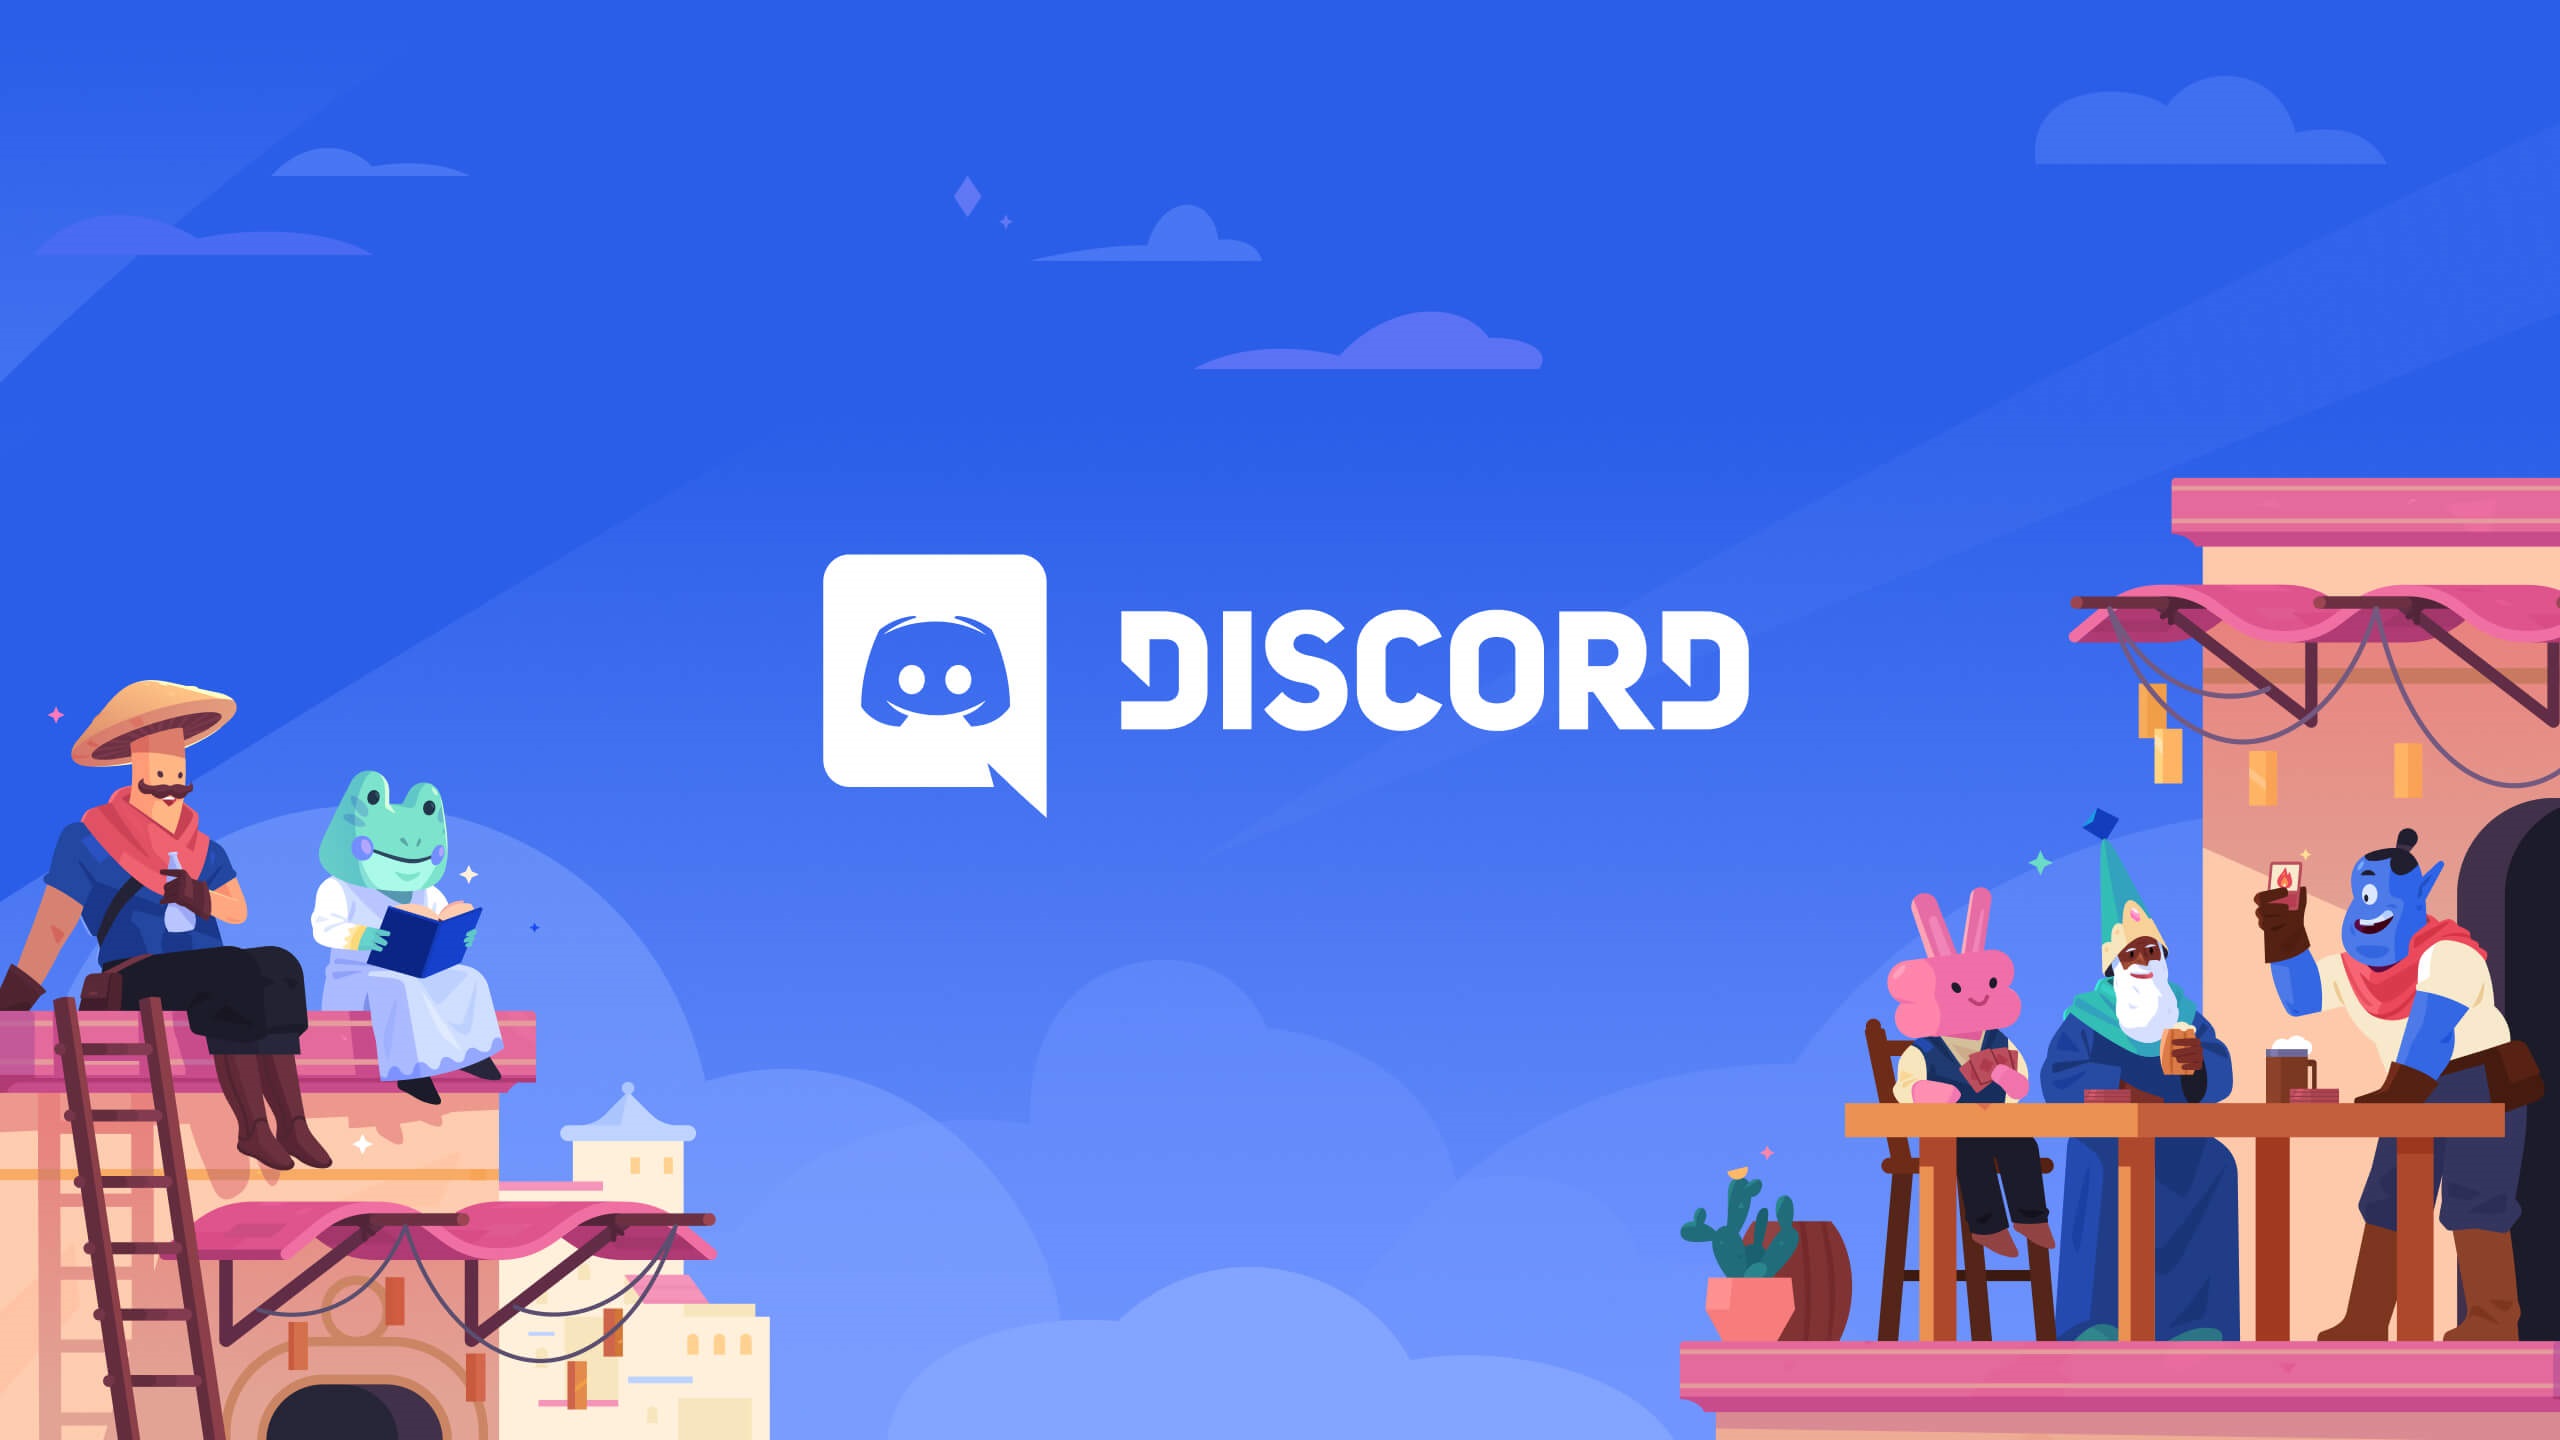 discord-unveils-expansion-of-in-app-shop-to-sell-custom-avatars-and-virtual-items